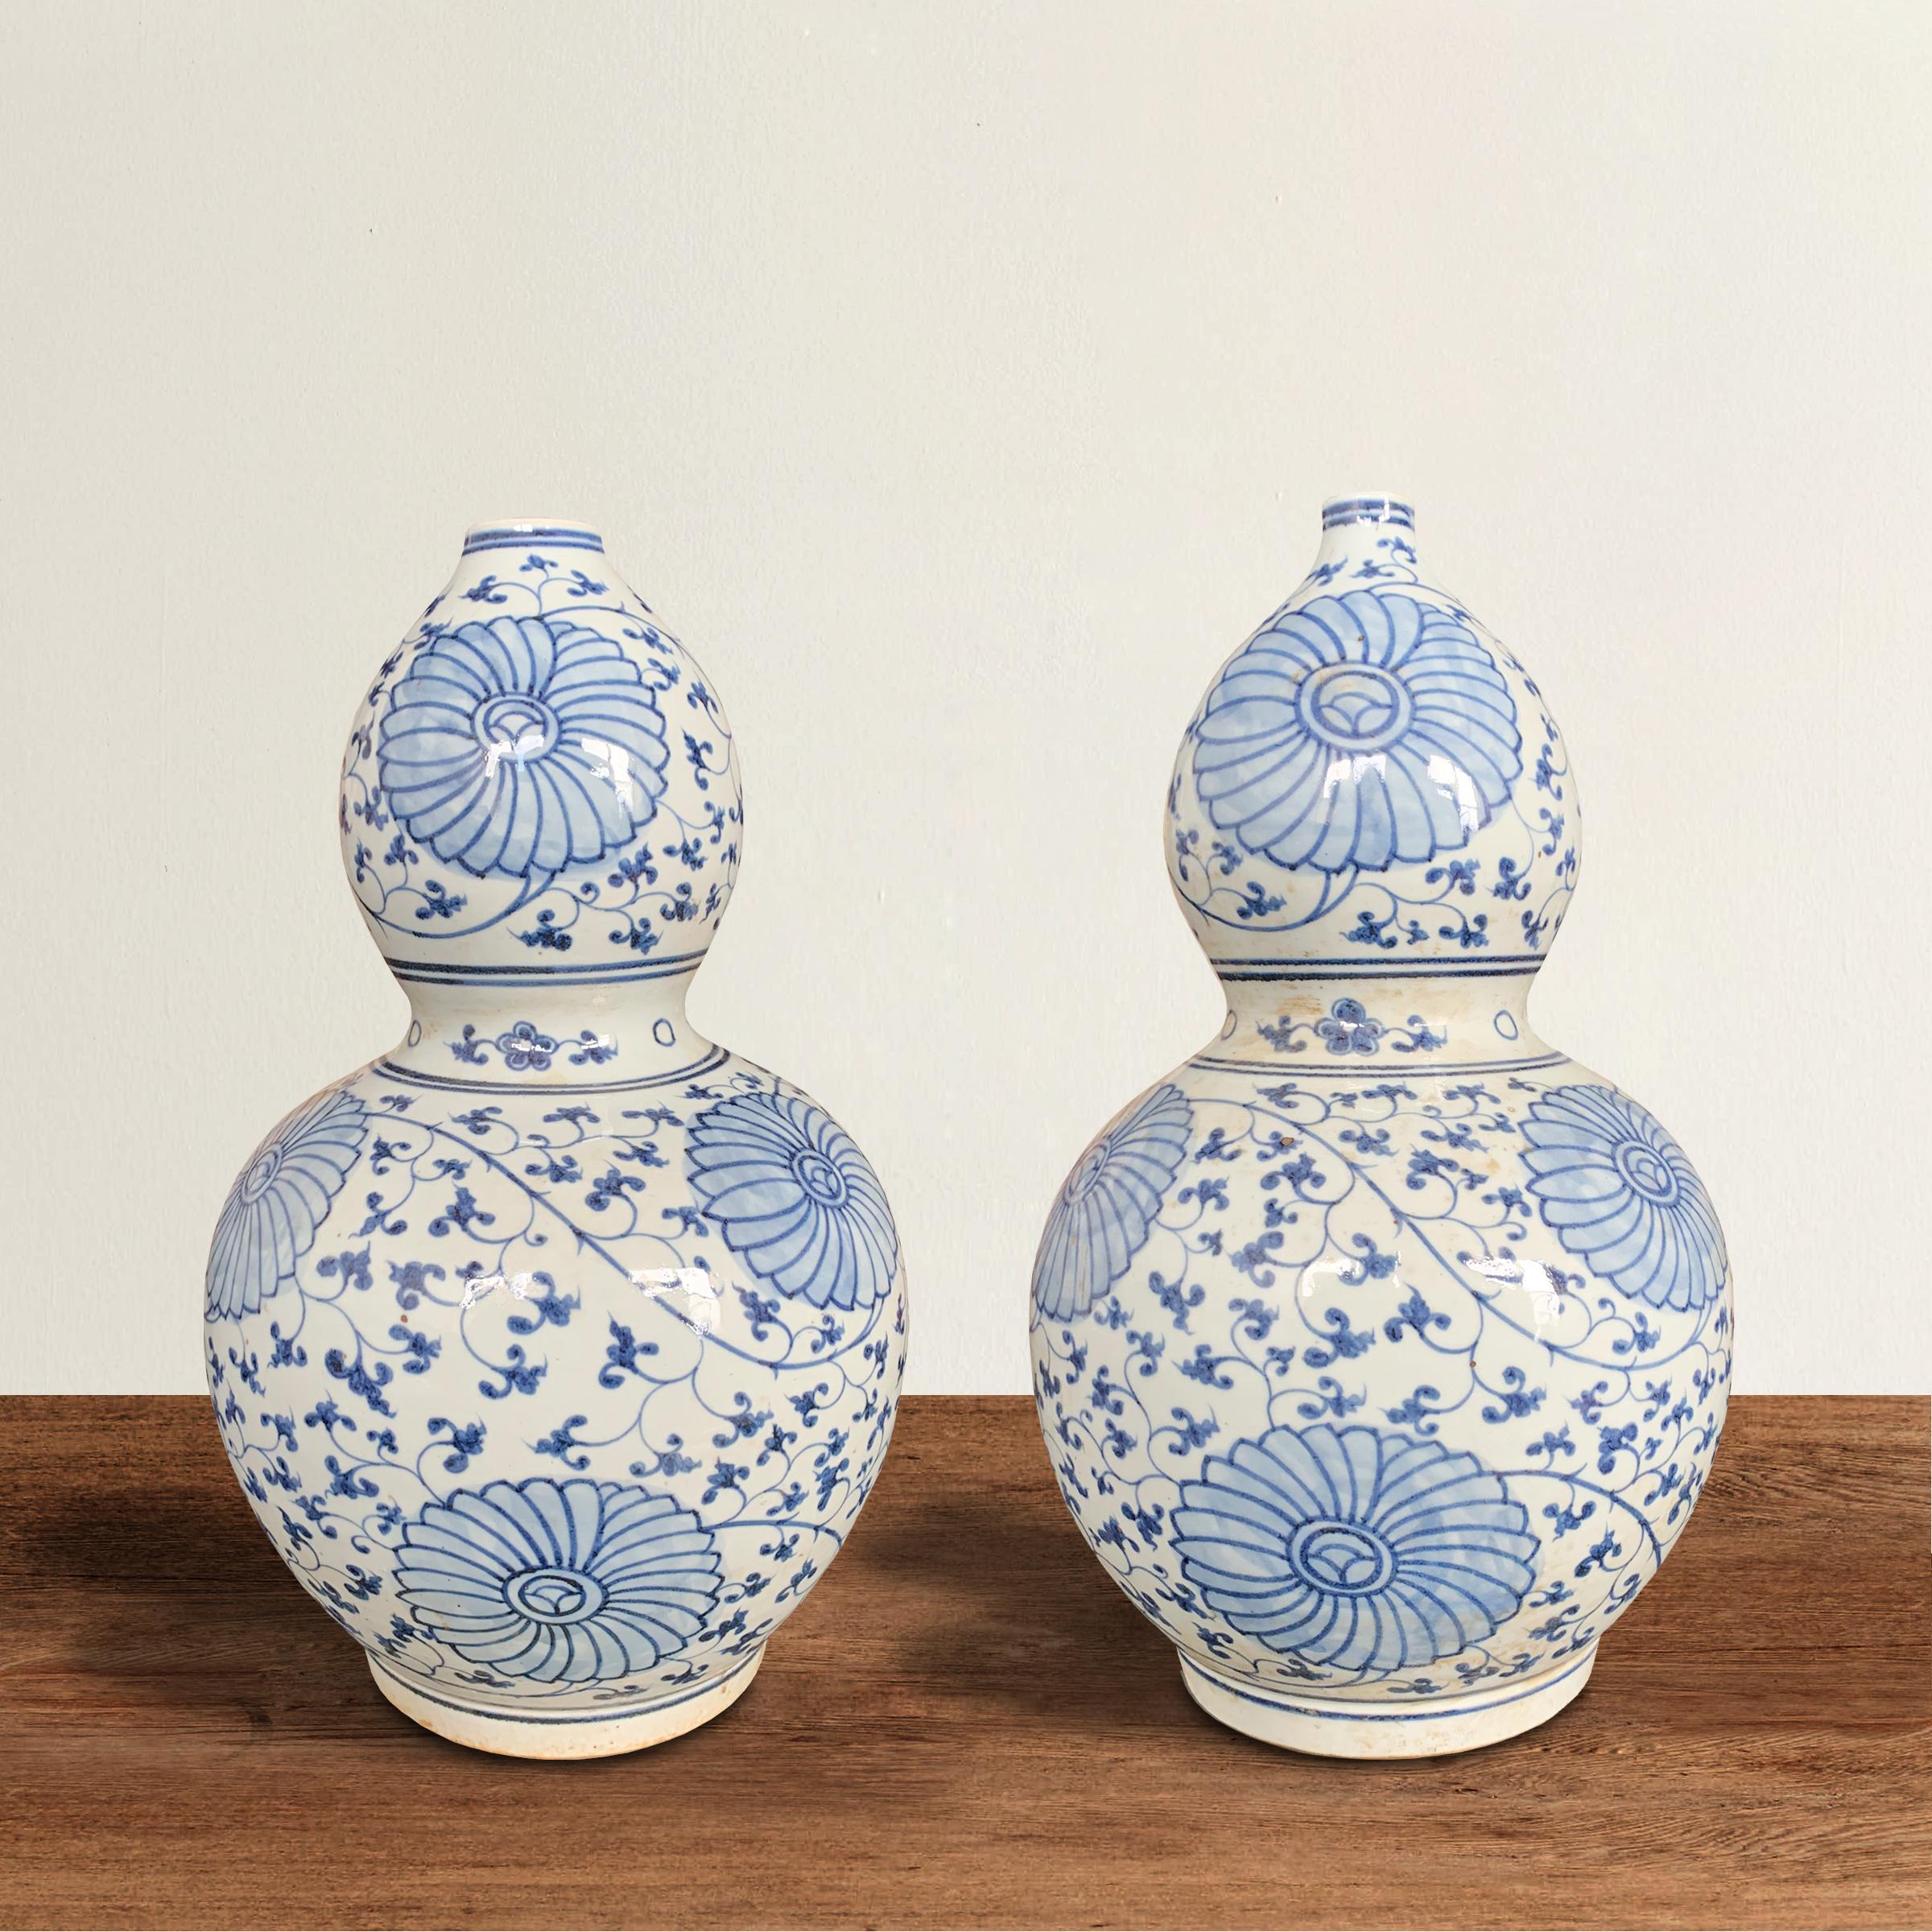 A wonderful pair of Chinese hand painted blue and white glazed porcelain double-gourd vases with a unique large scale floral and scrolling vine pattern.